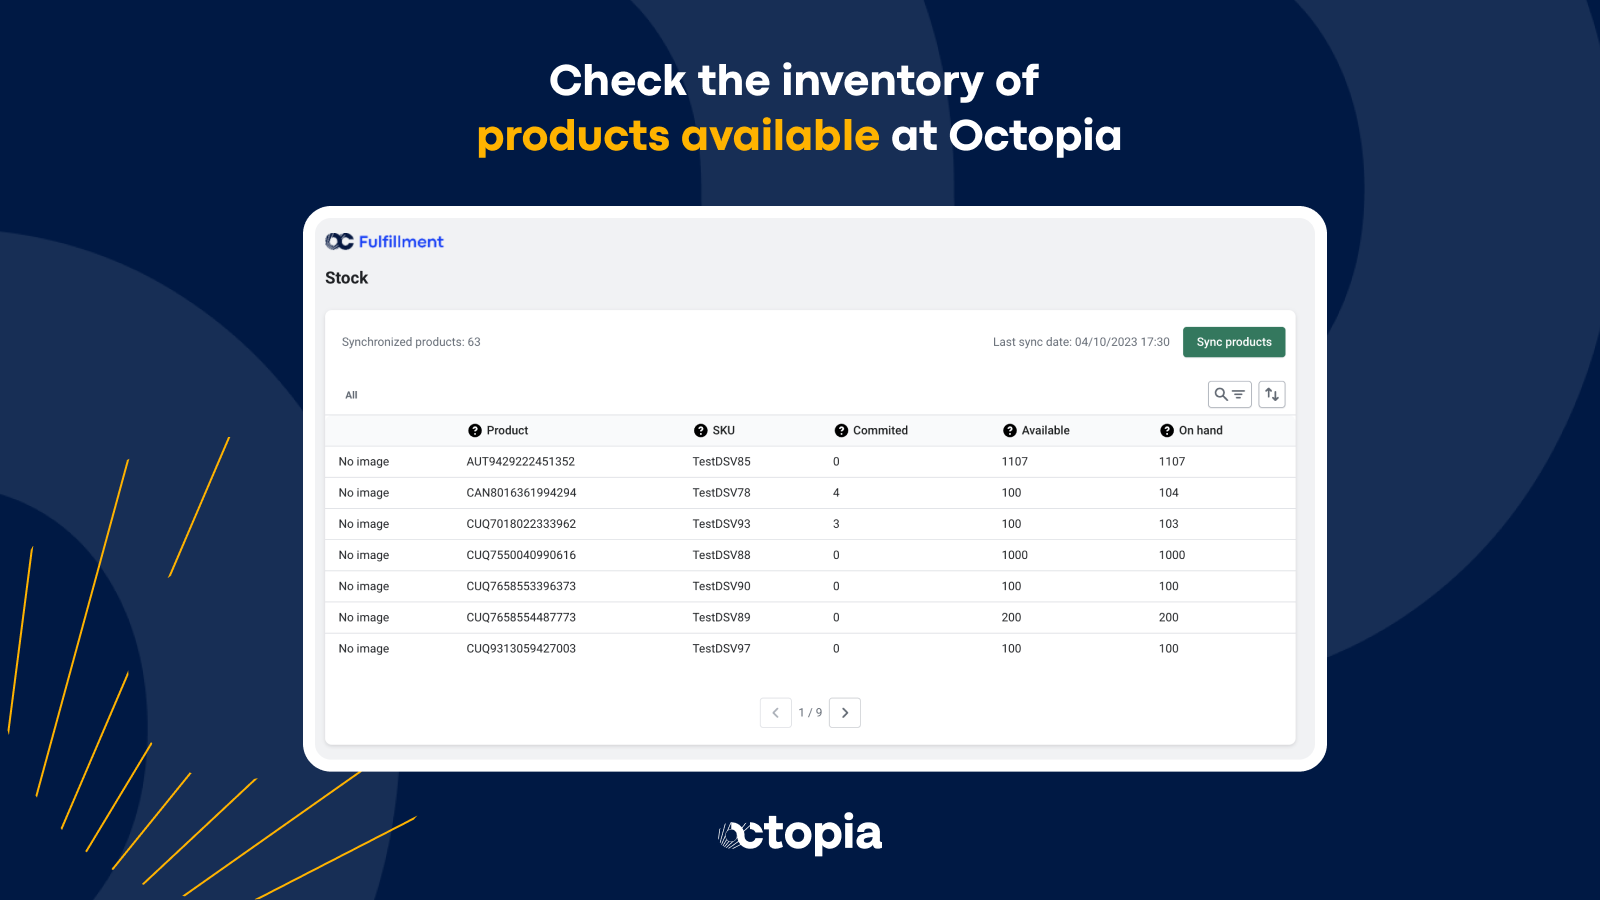 Check the inventory of products available at Octopia